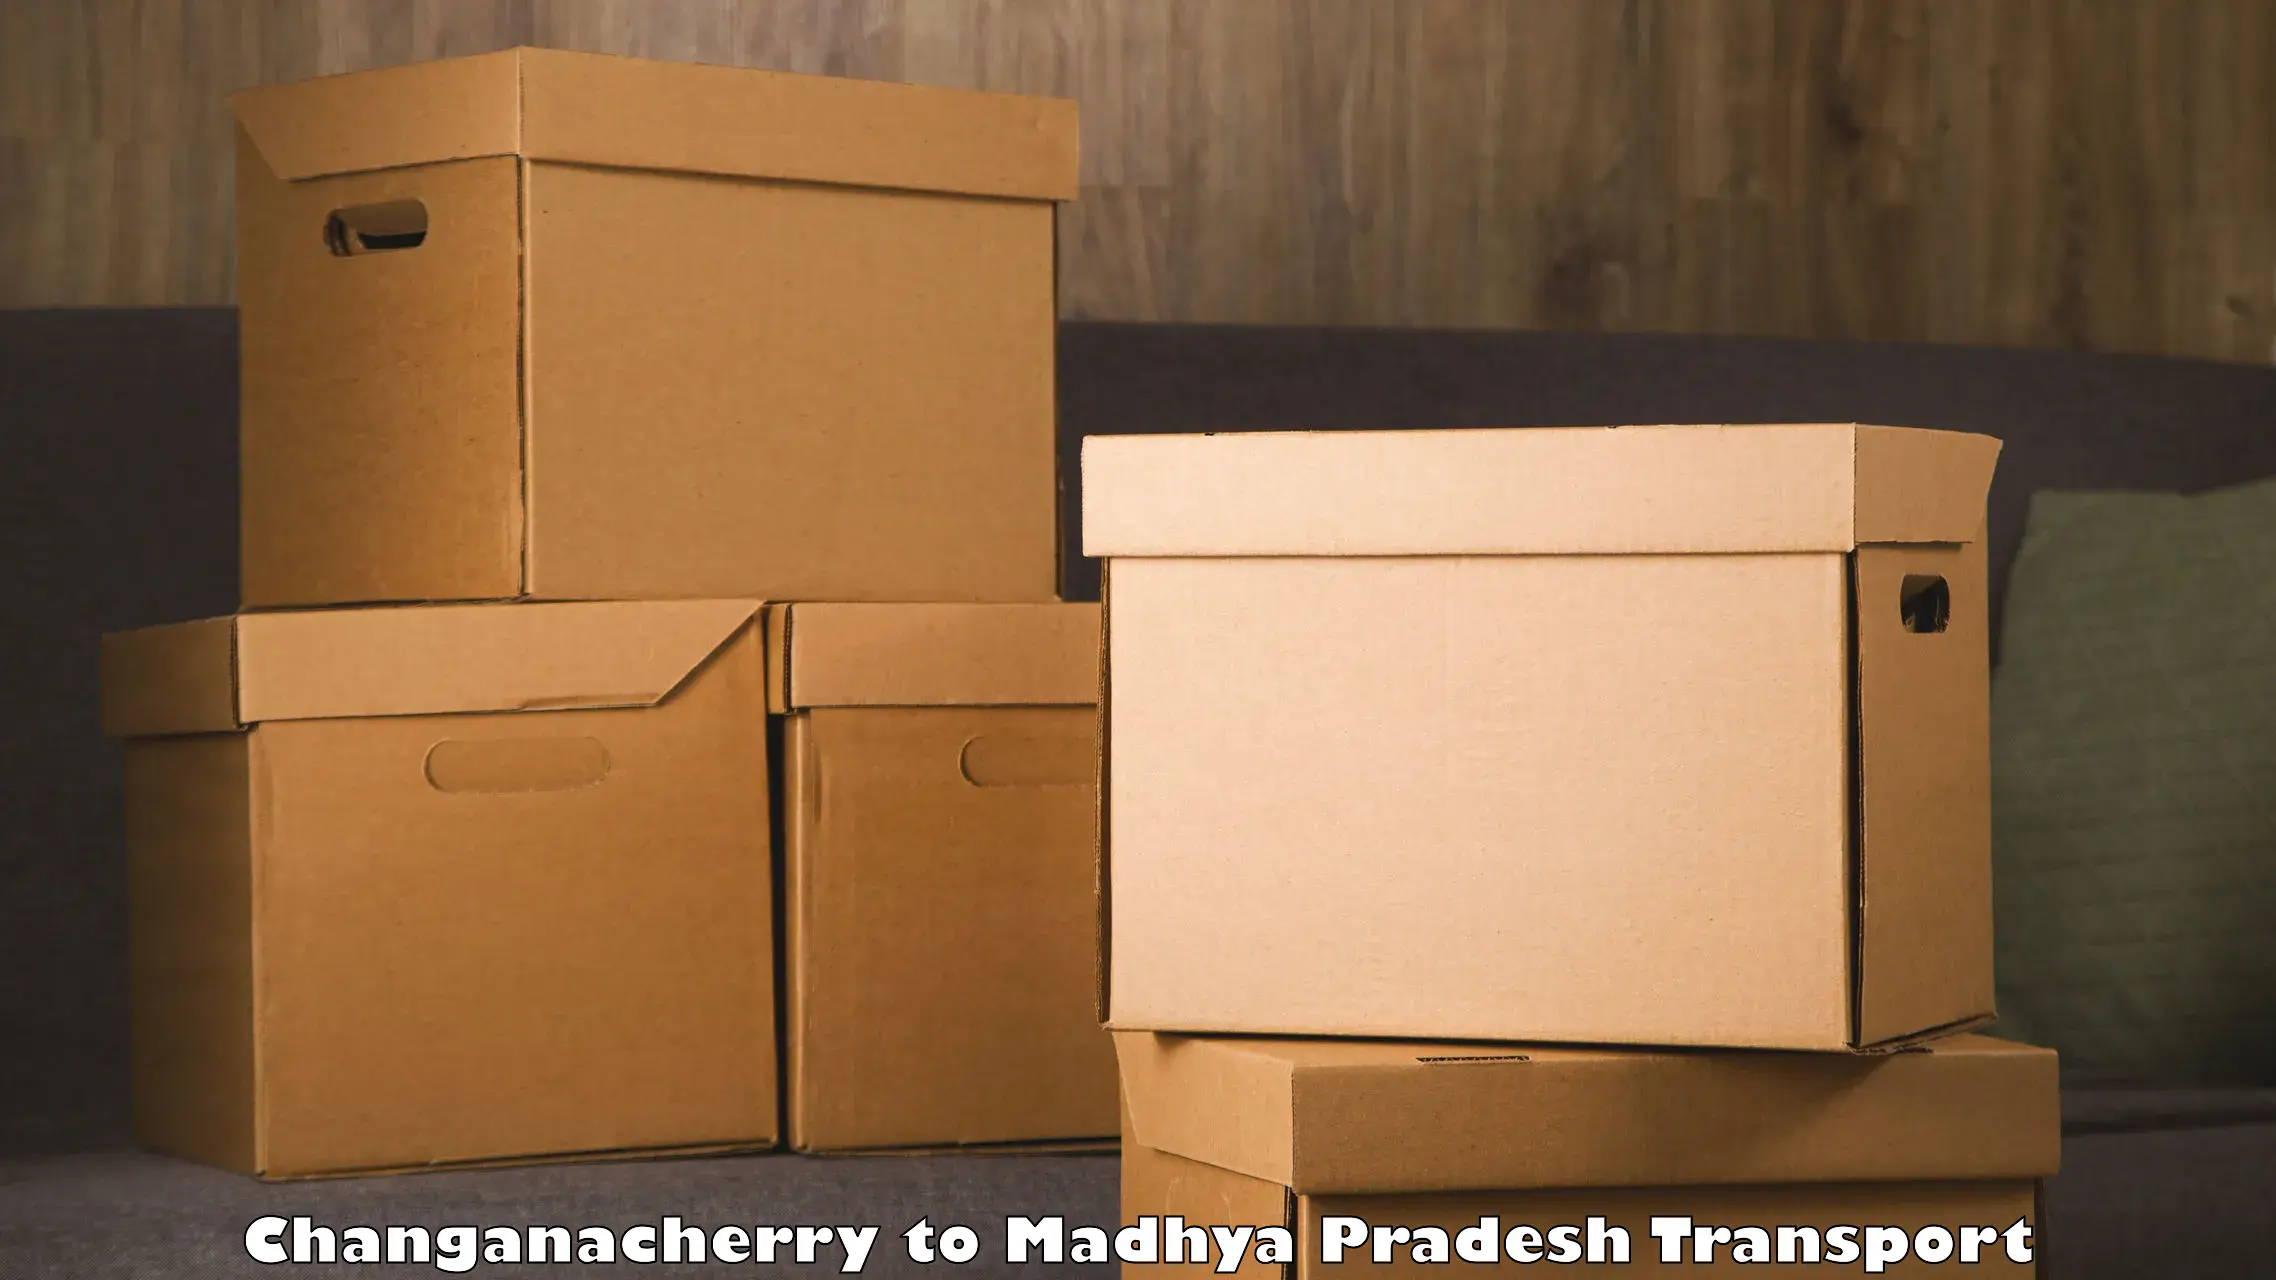 Goods delivery service Changanacherry to Khargone